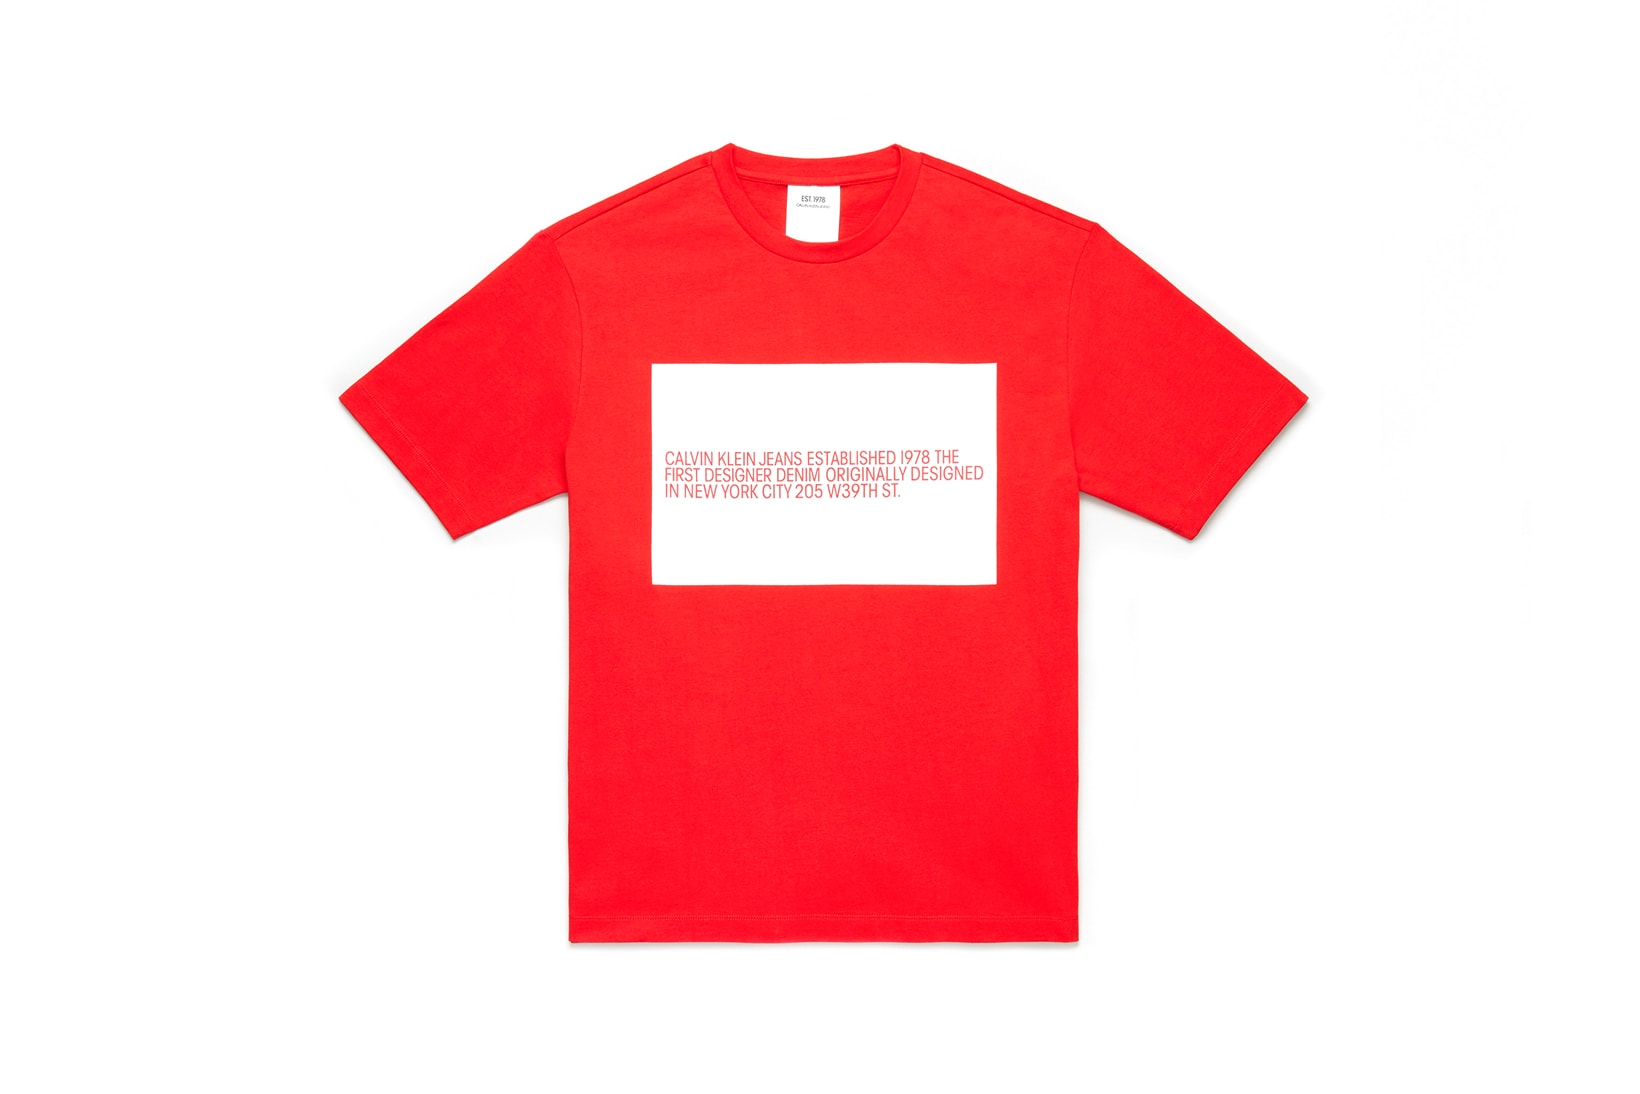 CALVIN KLEIN JEANS EST. 1978 Delivery 2 Drop 02 T-shirt Red White